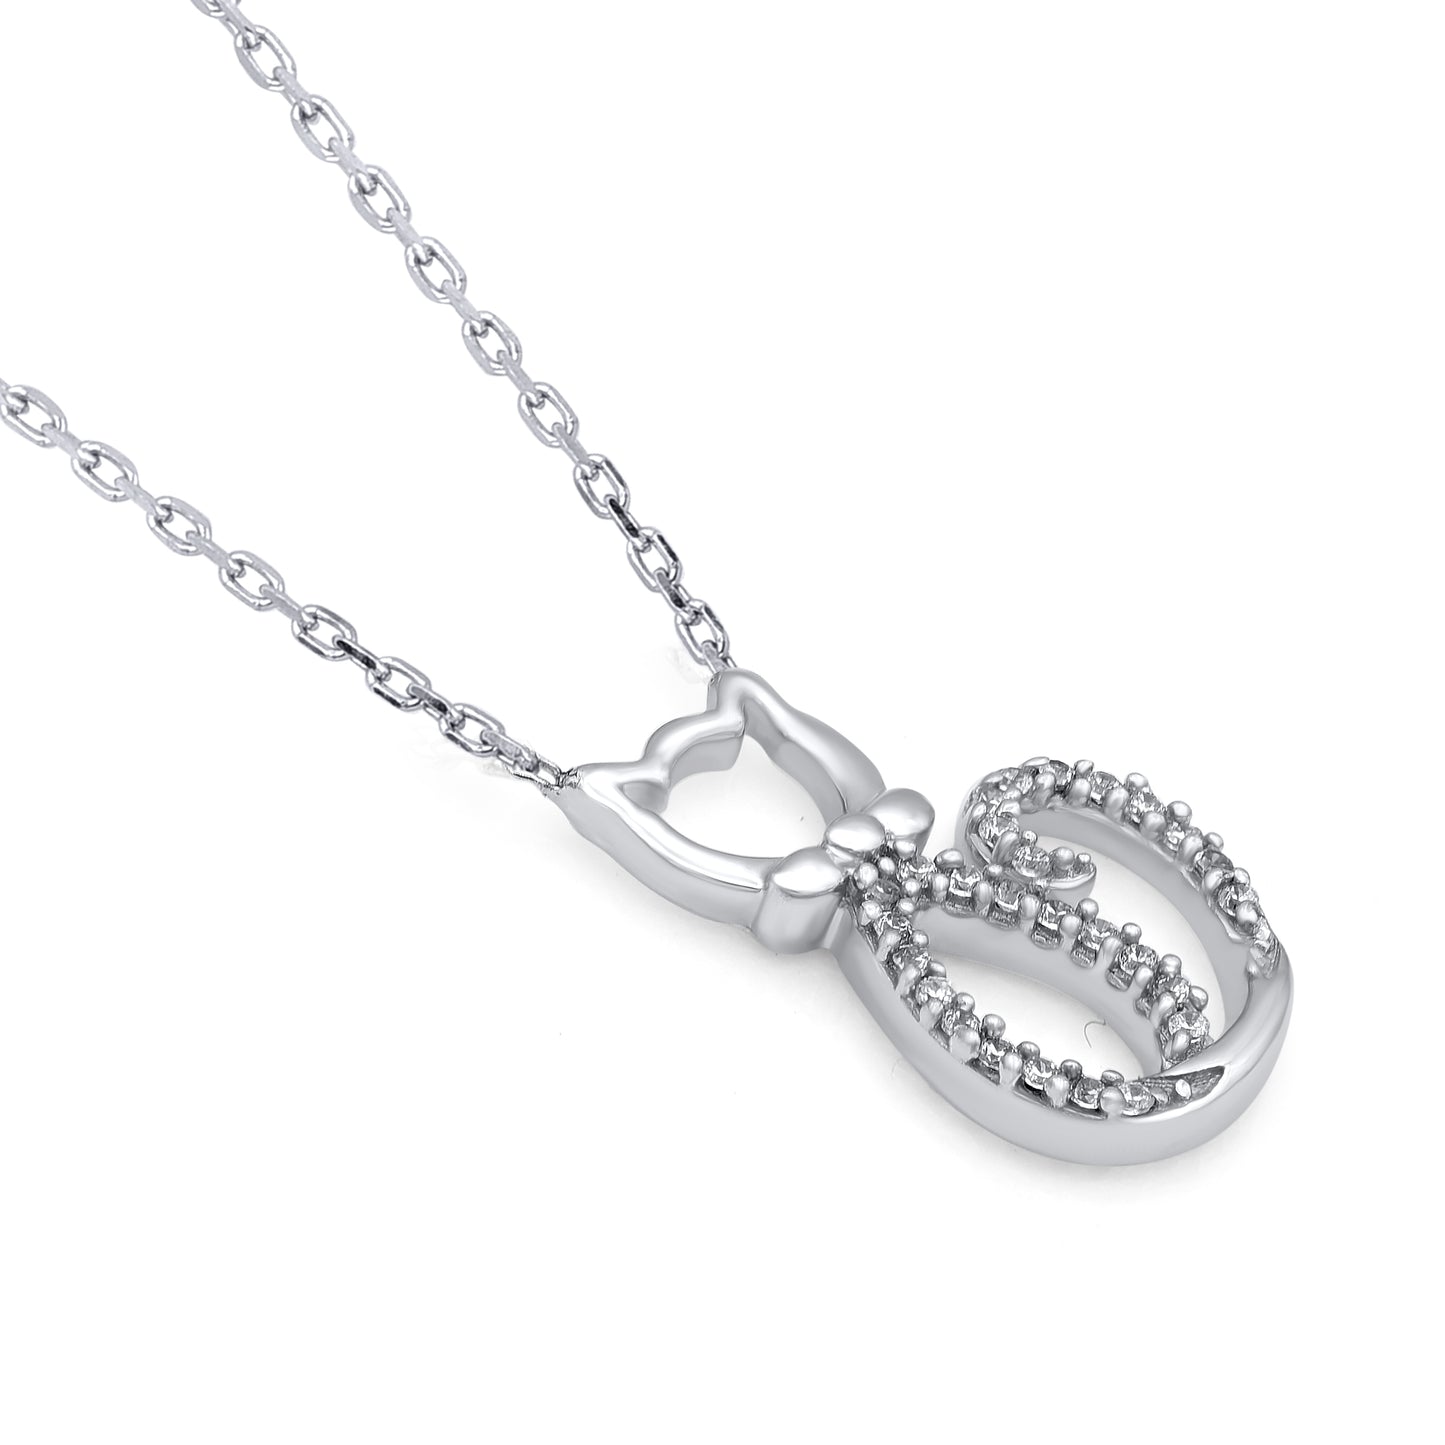 Dainty Cat Pendant Necklace in 925 Sterling Silver